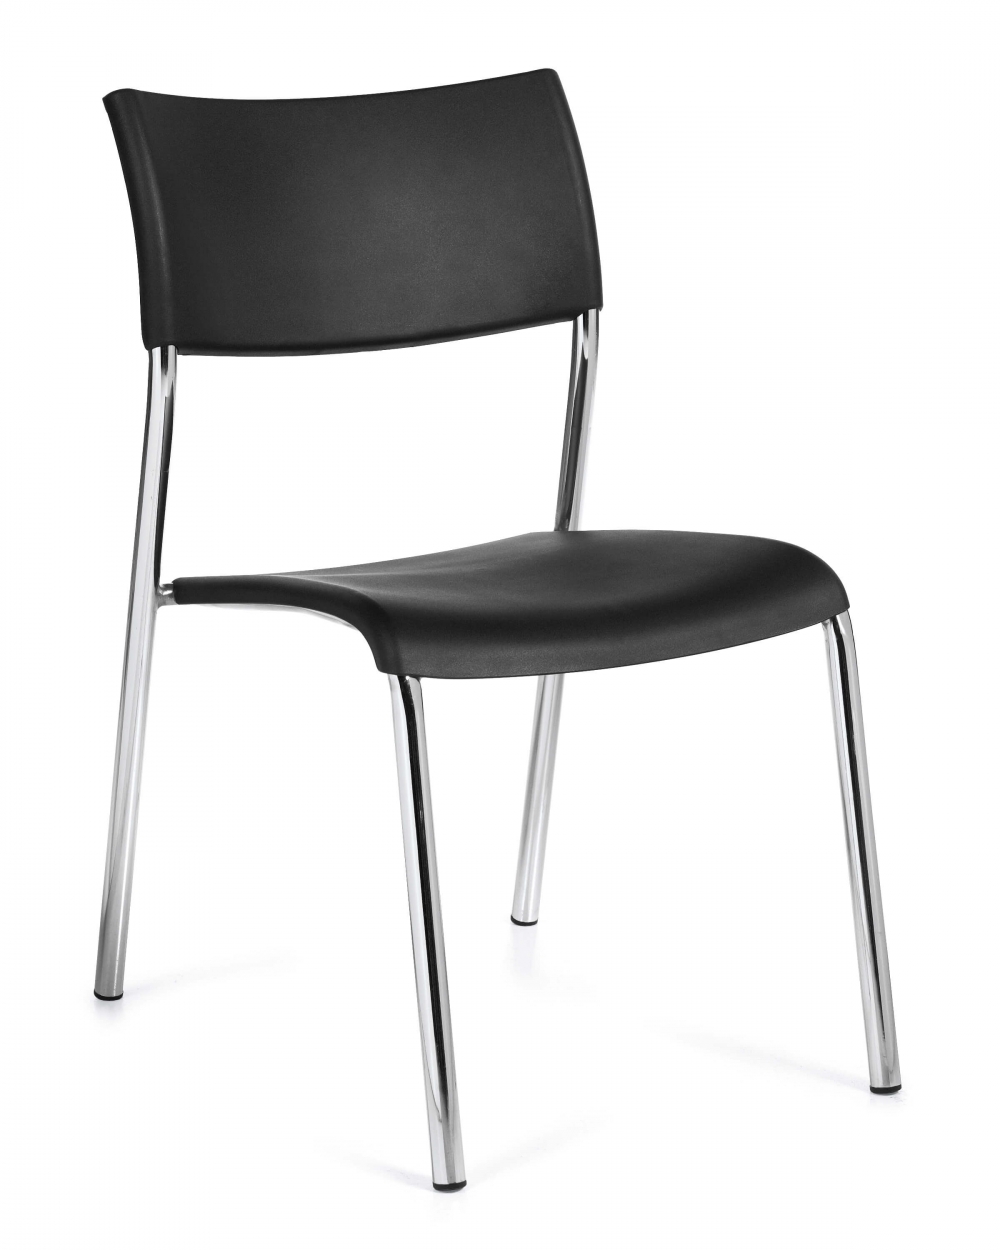 office-furniture-chairs-stacking-office-chairs.jpg